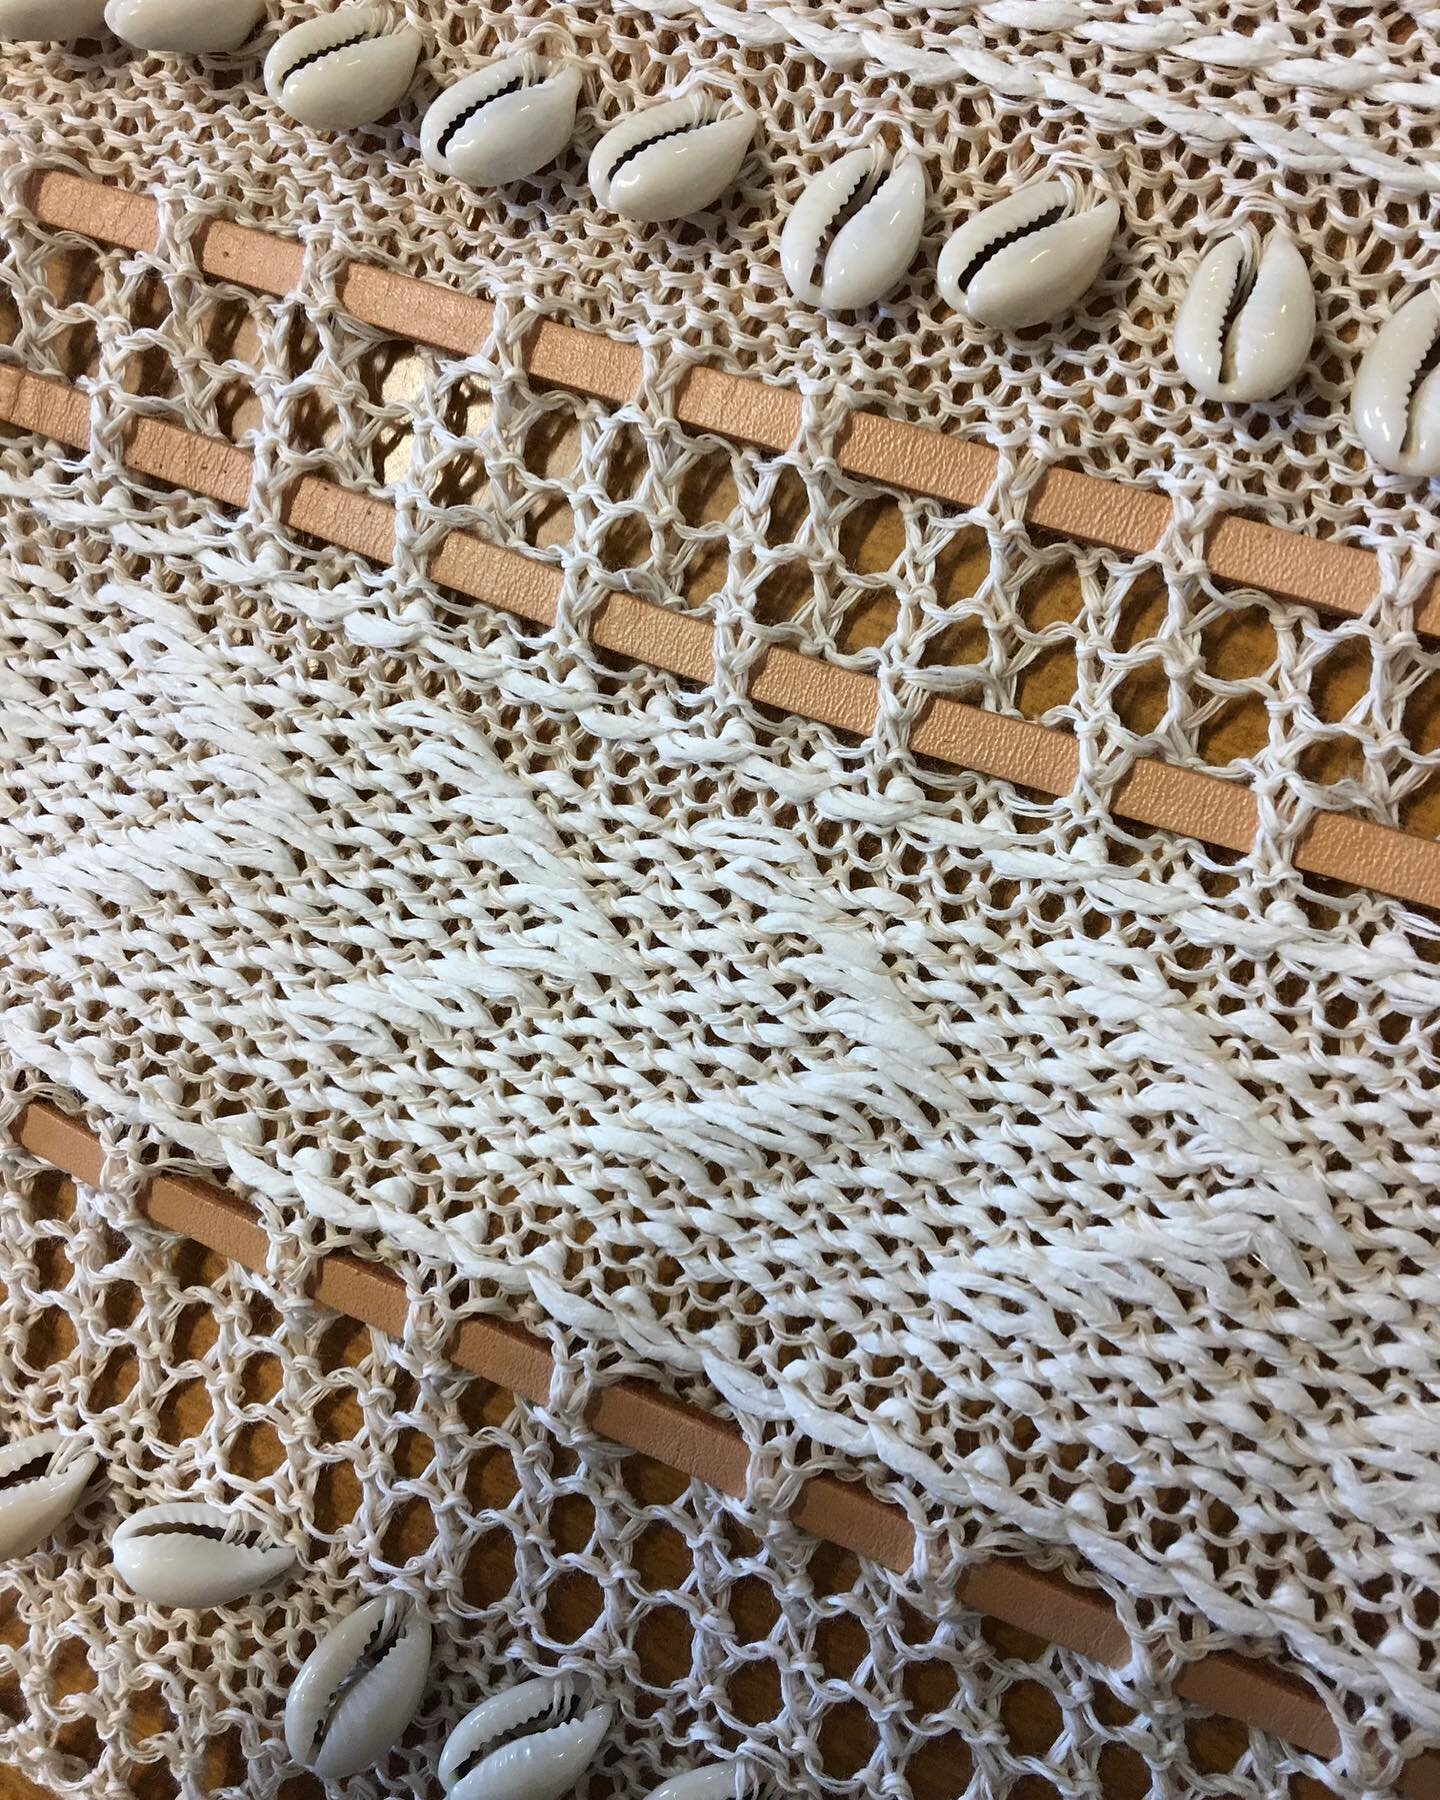 Artisanal inlay stitches with leather and shells. 🐚 
Made by MRC

#knitwear
#shells
#leather
#mrcknitwear
#artisanal
#madeinItaly
#innovation
#textiles
#technicaltextiles
#textures
#knitting
#knit
#knitlab
#knittersofinstagram